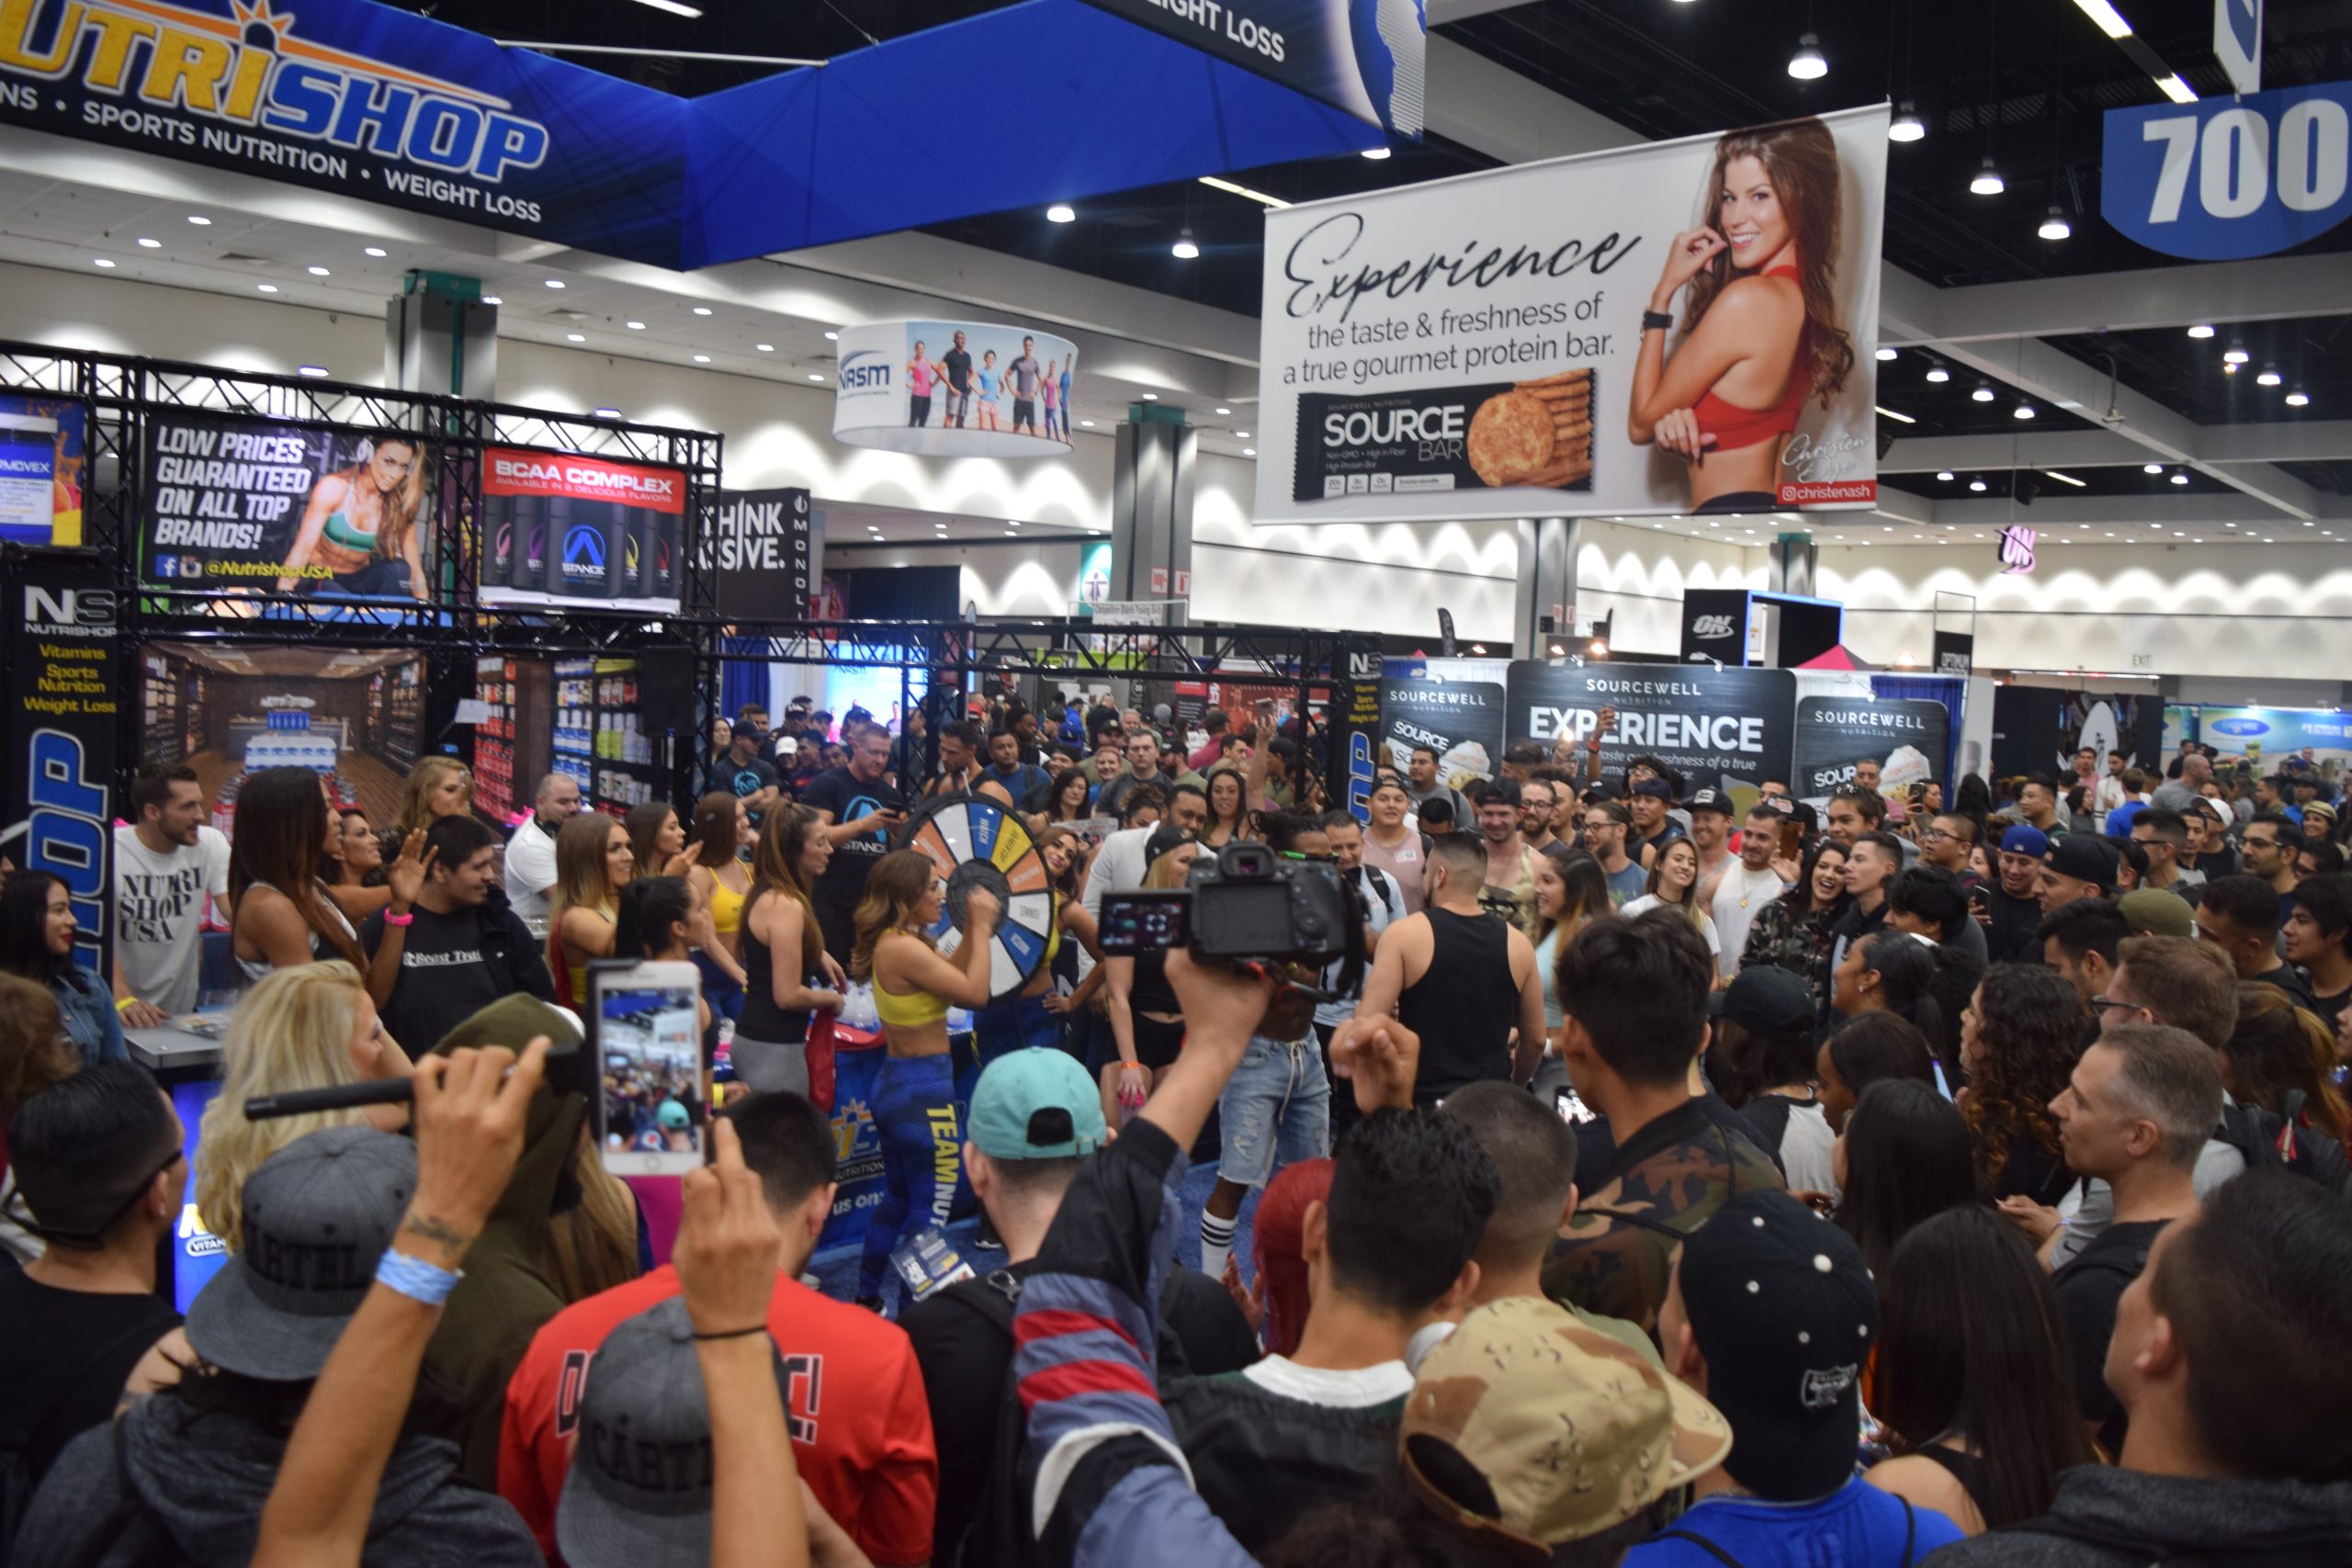 LA Convention Center crowd at The Fit Expo